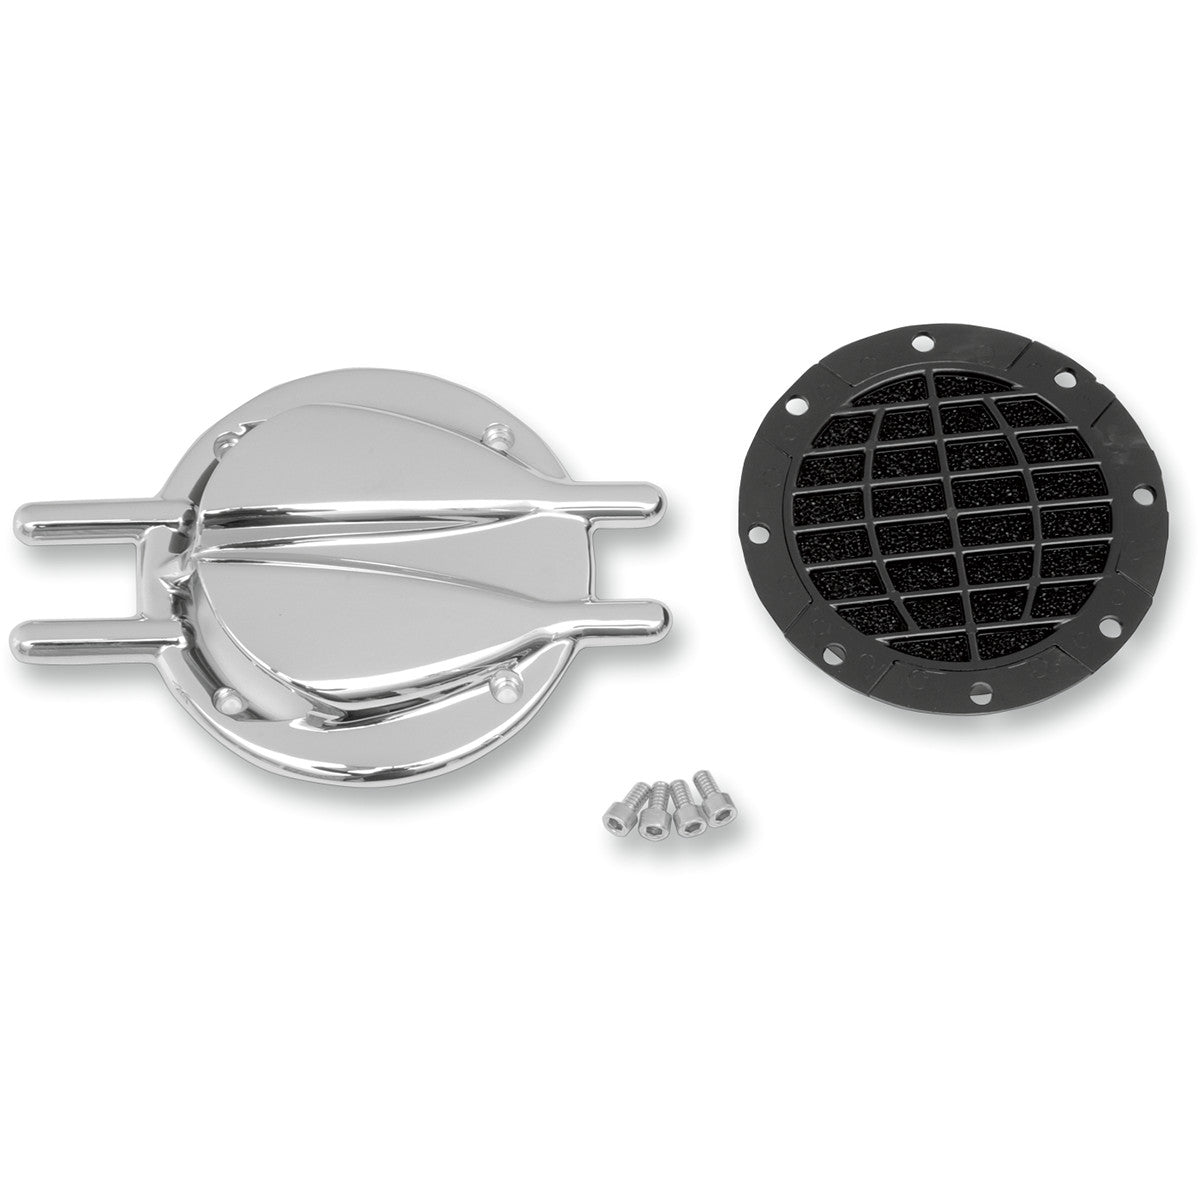 Tapa Para Filtro Aire Kuryakyn 8498 Stinger Trap Door For Hypercharger Chrome